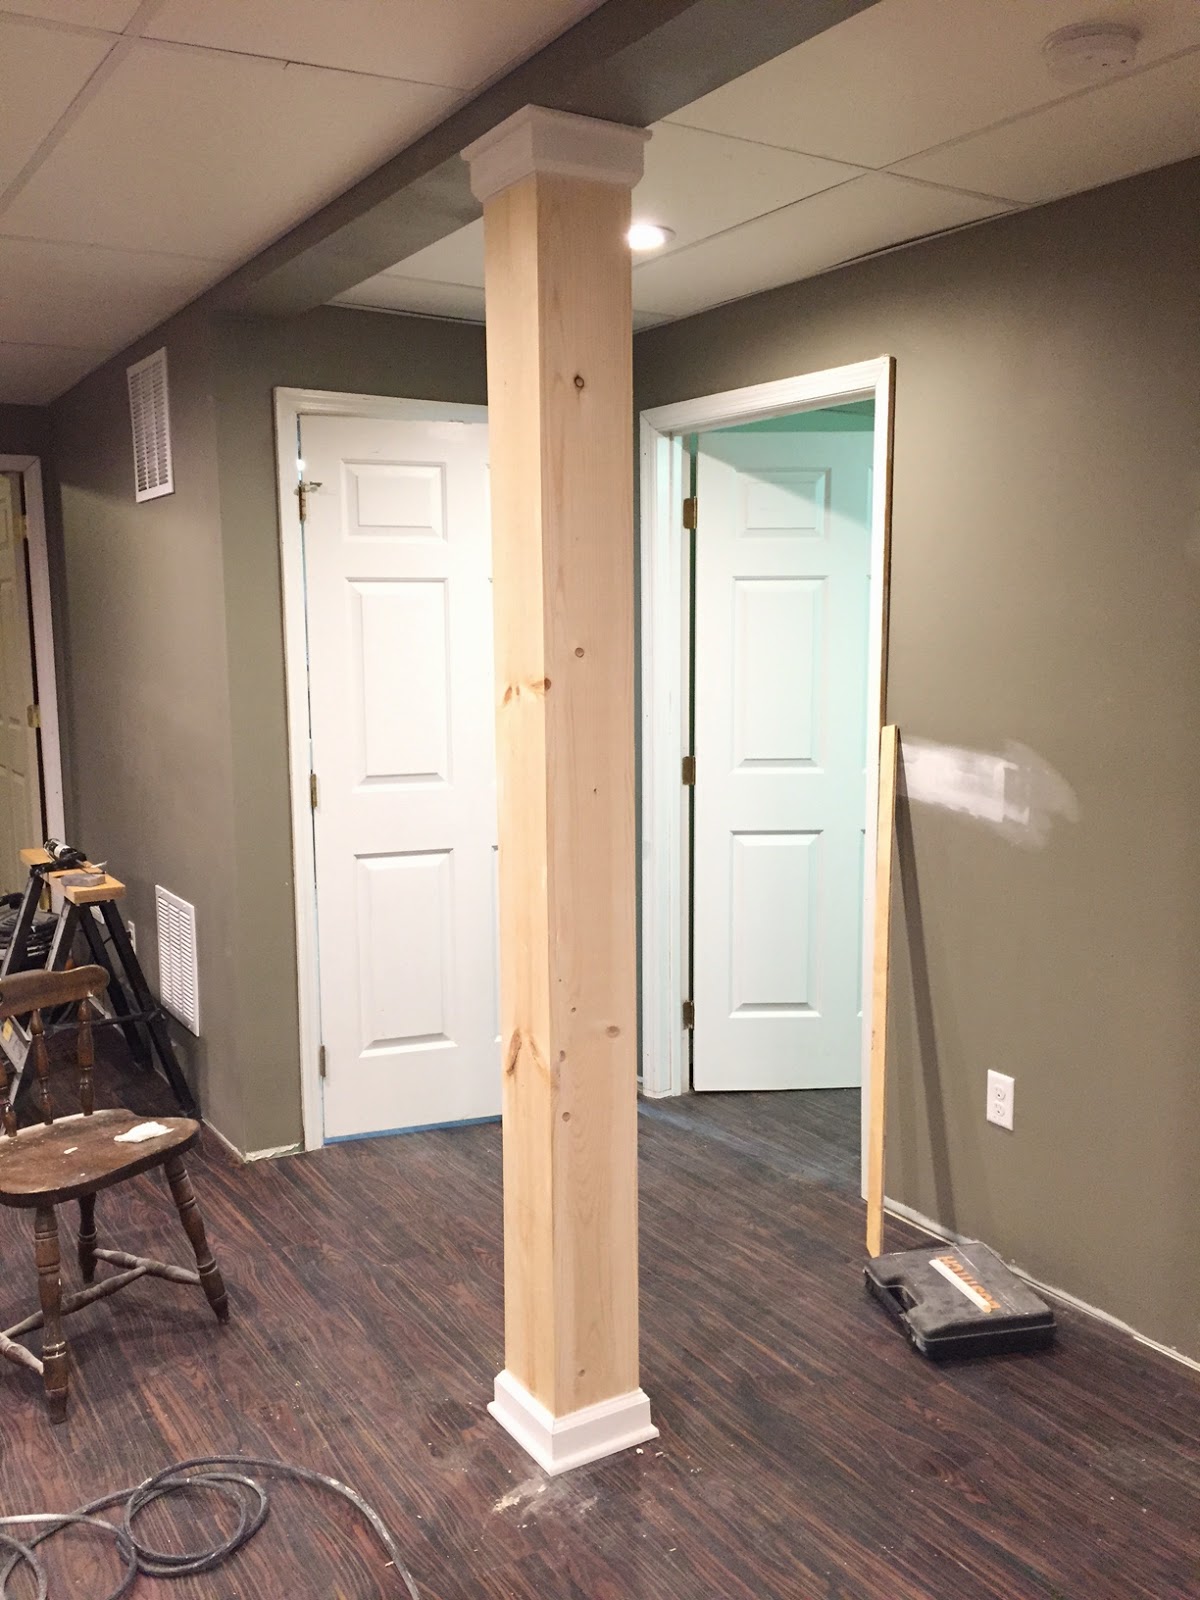 Over on Dover: A Post About A Post: Disguising A Basement ...